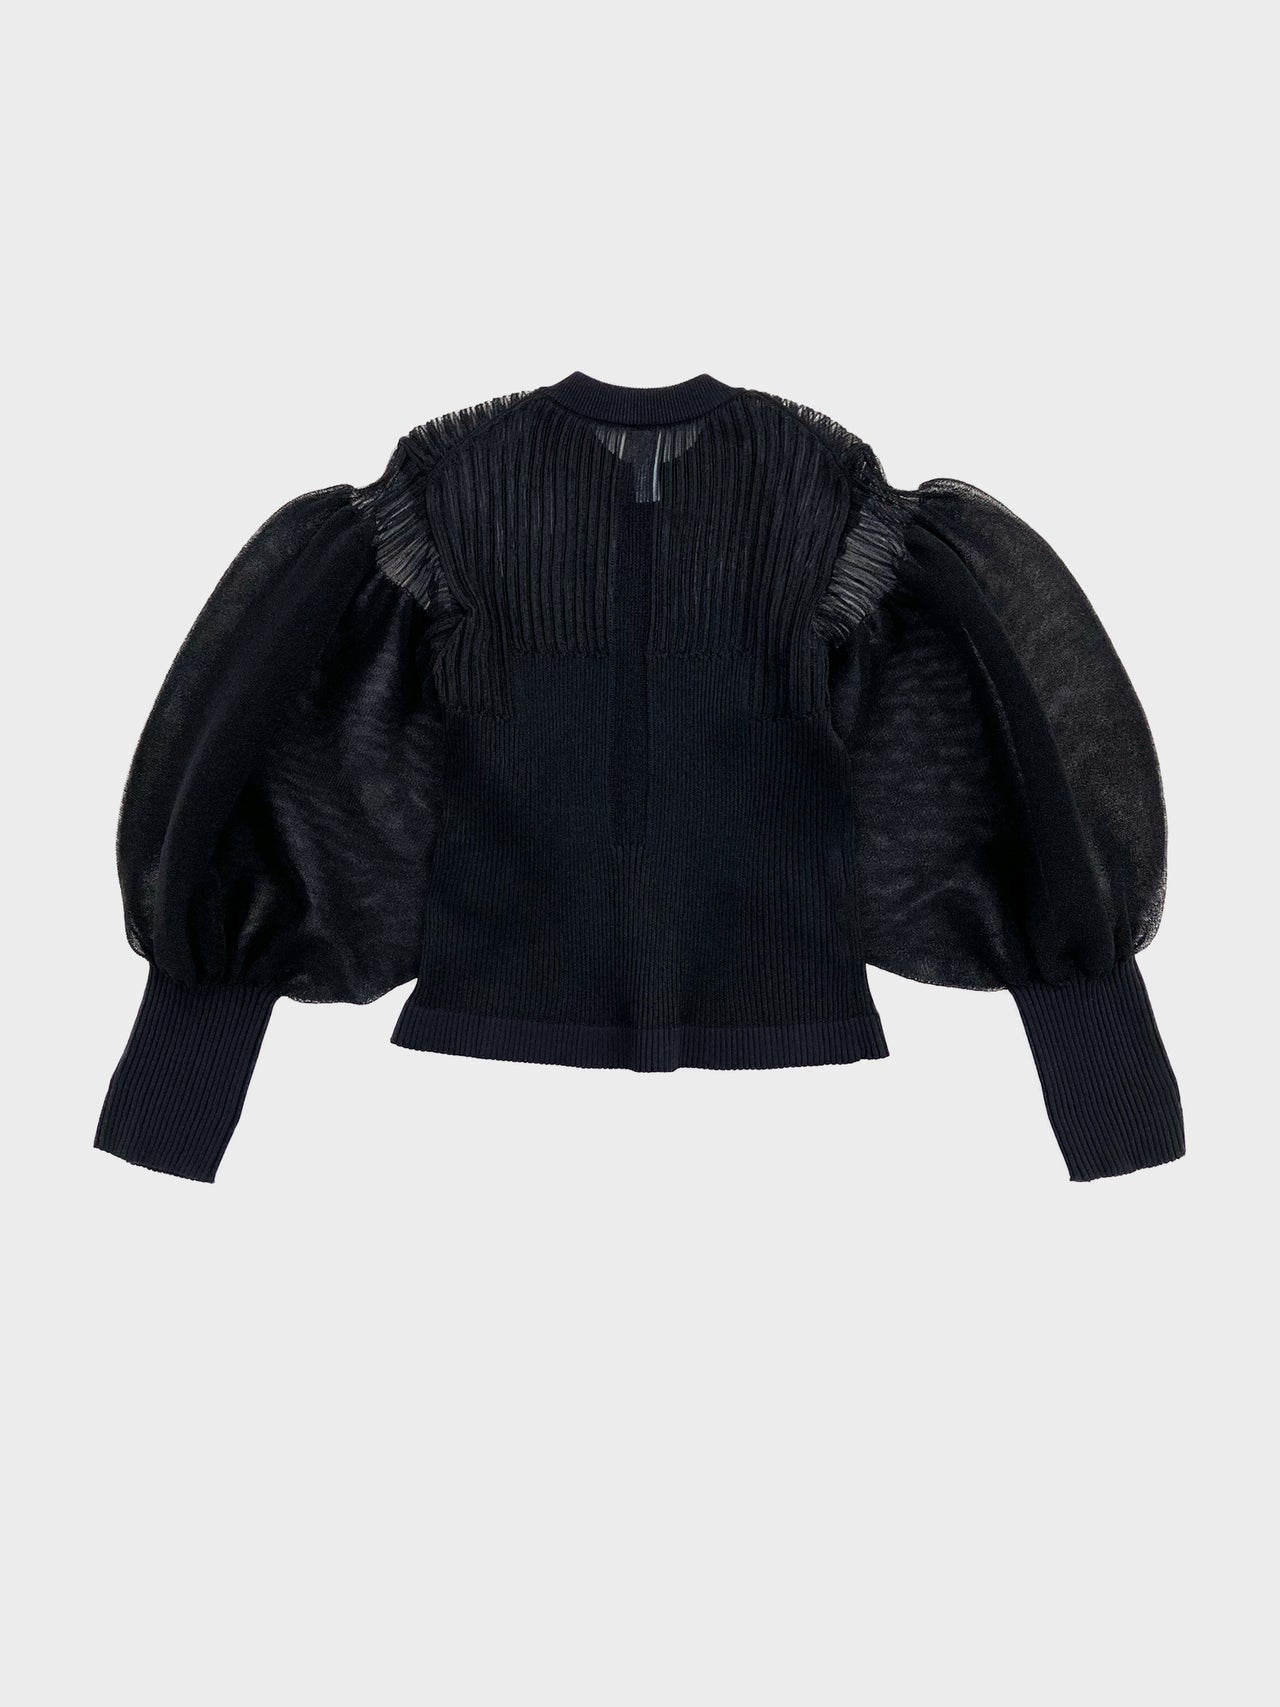 CFCL / FLUTED LUCENT GLITTER PUFF SLEEVE CROPPED CARDIGAN (BLACK)